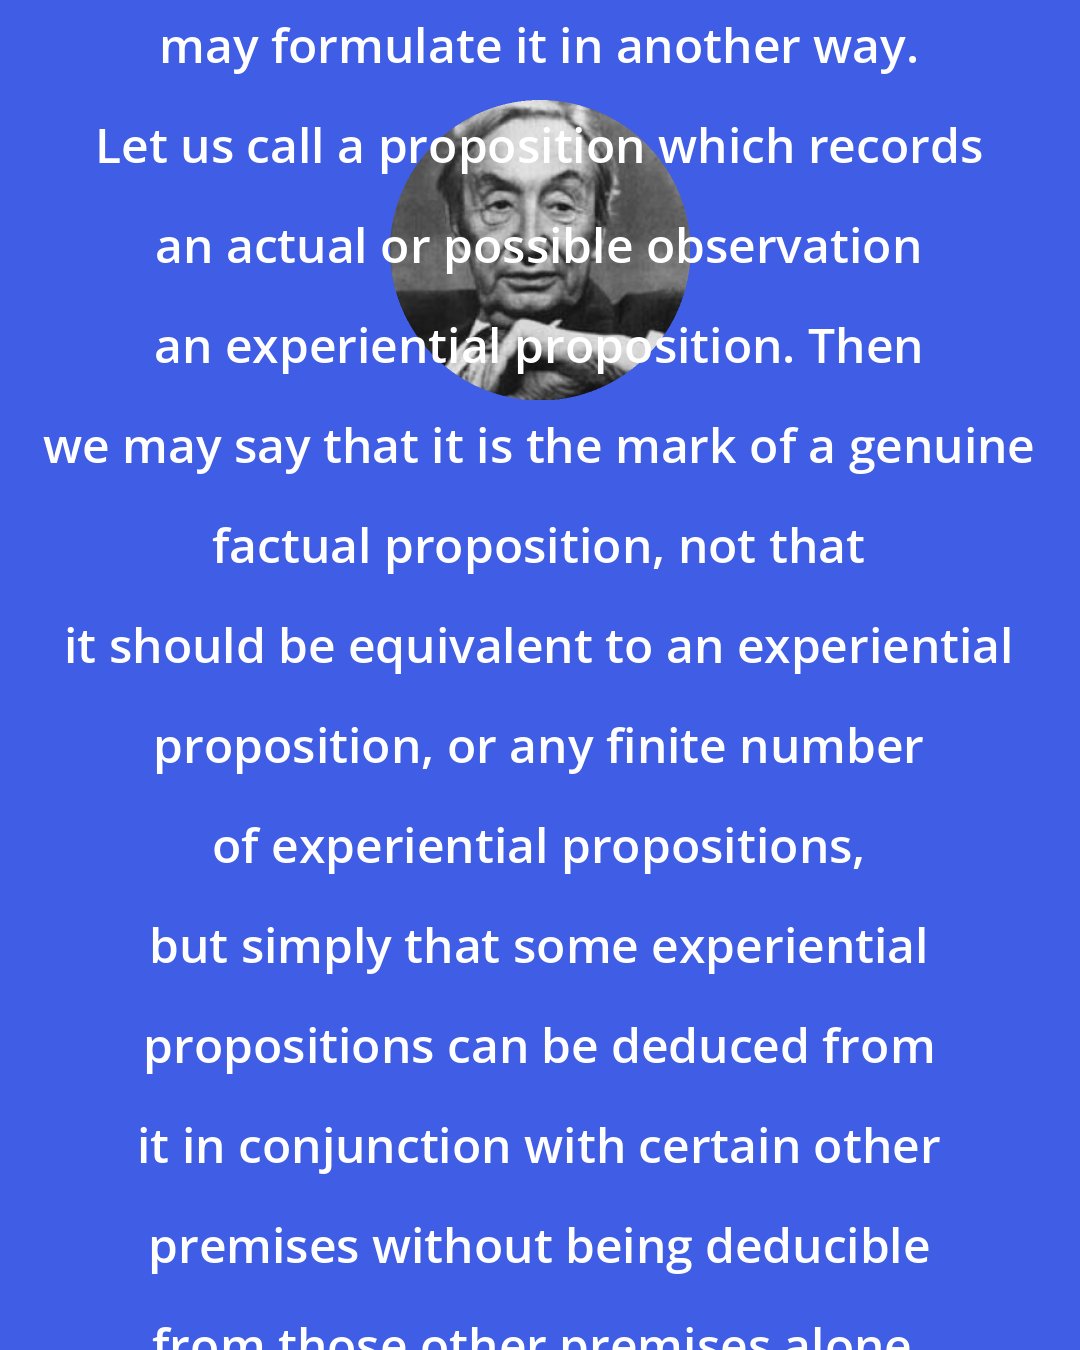 A.J. Ayer: To make our position clearer, we may formulate it in another way. Let us call a proposition which records an actual or possible observation an experiential proposition. Then we may say that it is the mark of a genuine factual proposition, not that it should be equivalent to an experiential proposition, or any finite number of experiential propositions, but simply that some experiential propositions can be deduced from it in conjunction with certain other premises without being deducible from those other premises alone.